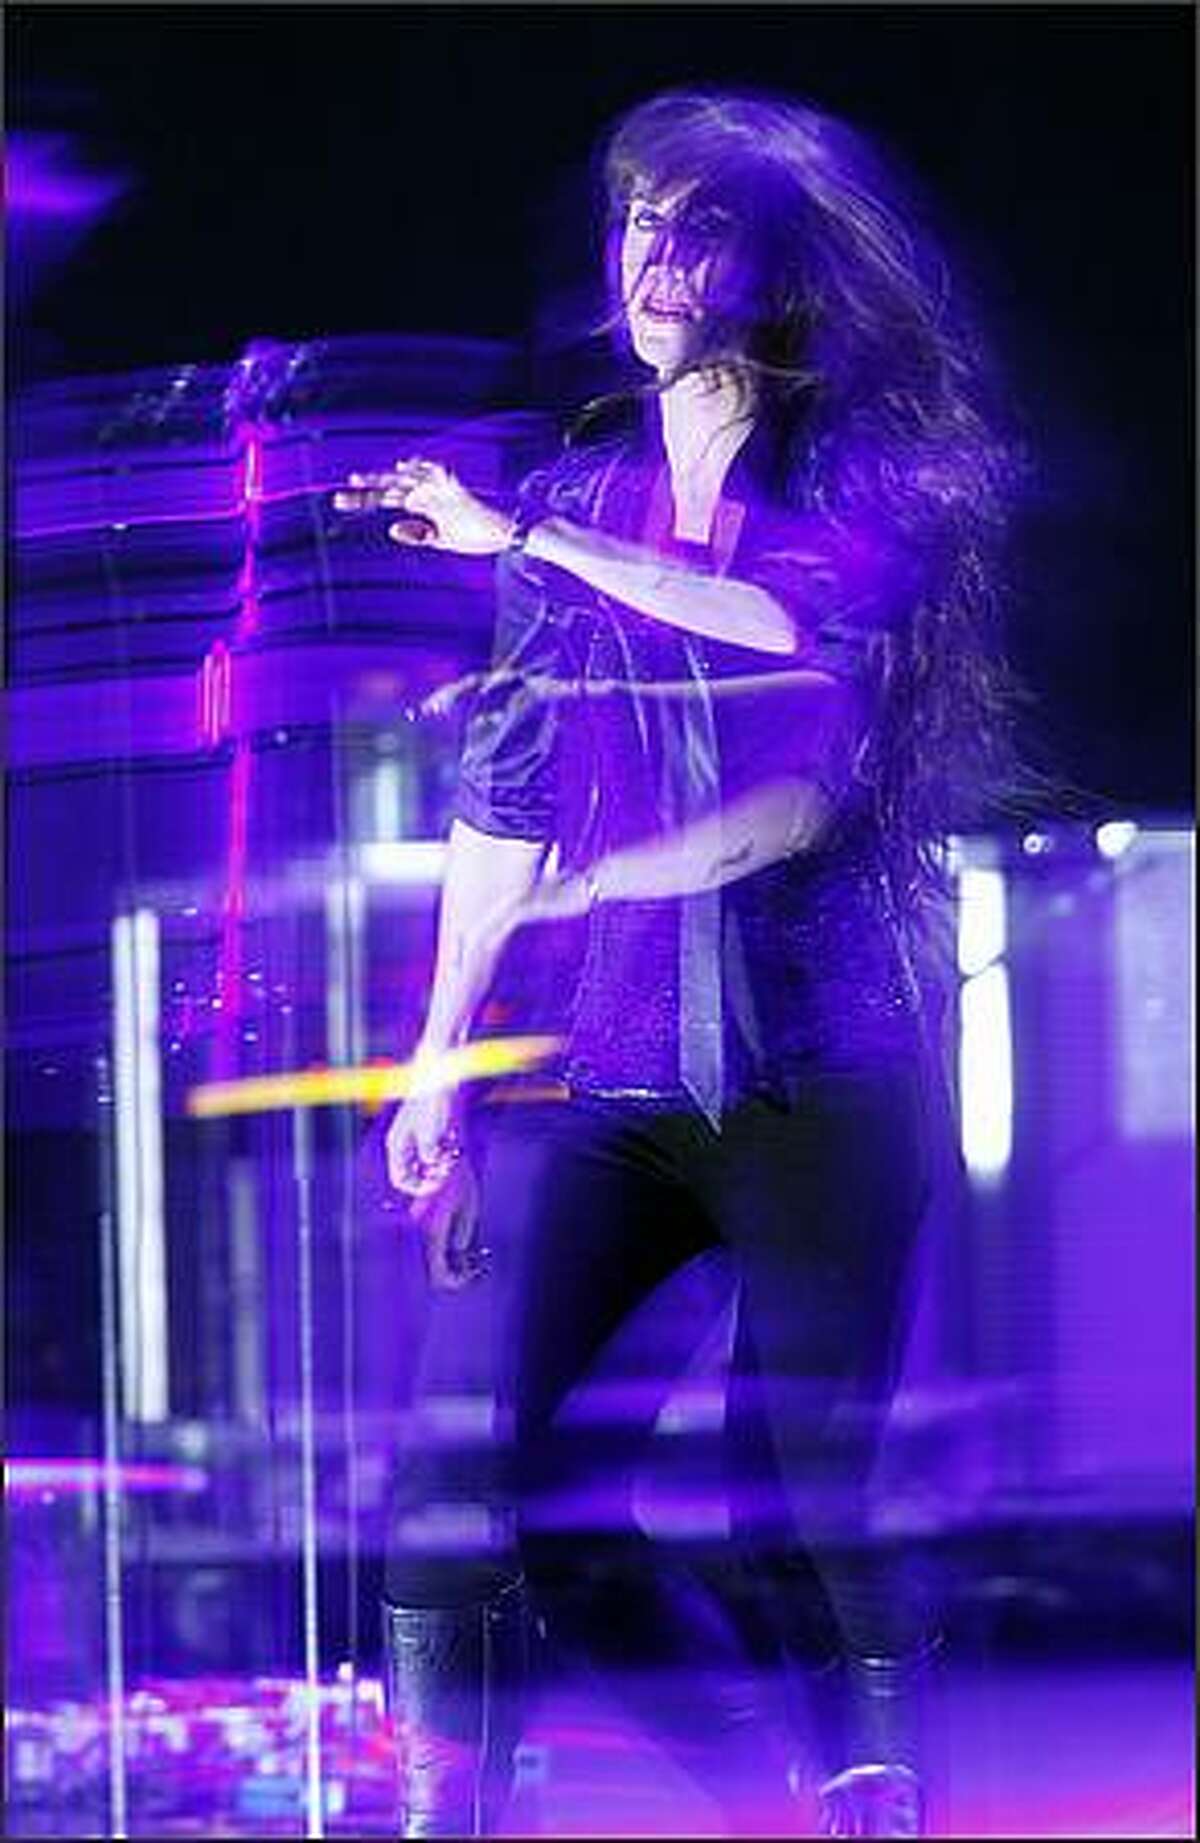 Illuminated by strobe lights and captured by a slow shutter speed Alanis Morissette plays the Paramount Theater.